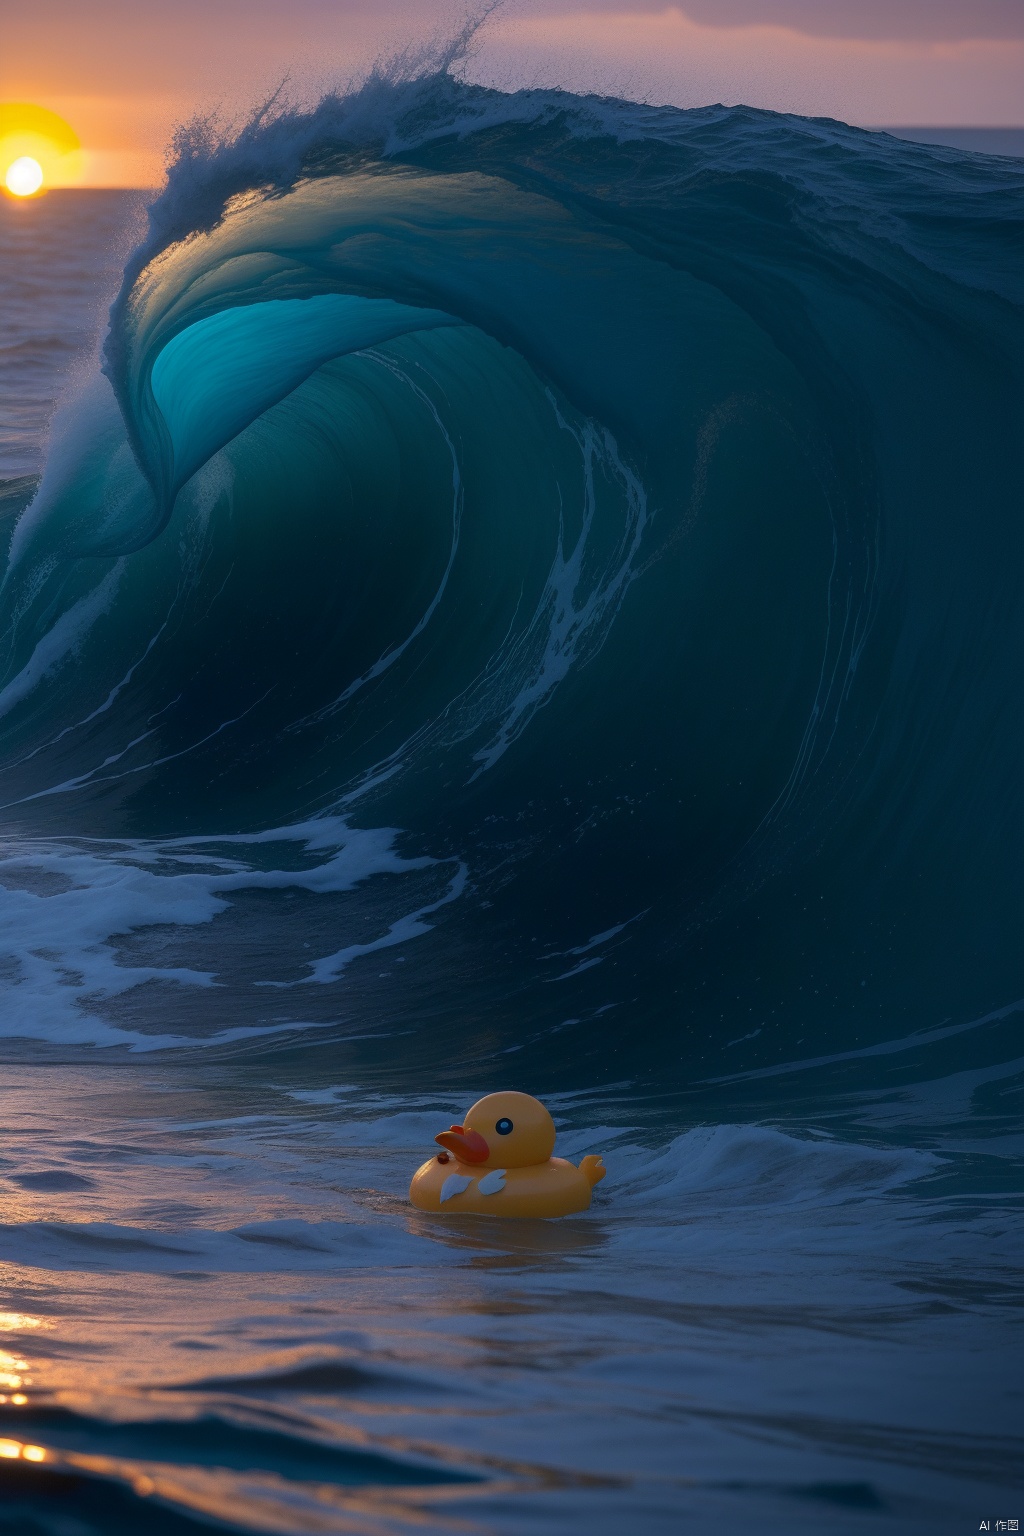  a tiny, lost rubber ducky braving the tumultuous ocean. towering waves and powerful currents, adding to the sense of isolation and vulnerability. The sun sets in the background, casting a warm, golden glow across the sky, with hues of orange and pink illuminating the vastness of the ocean.